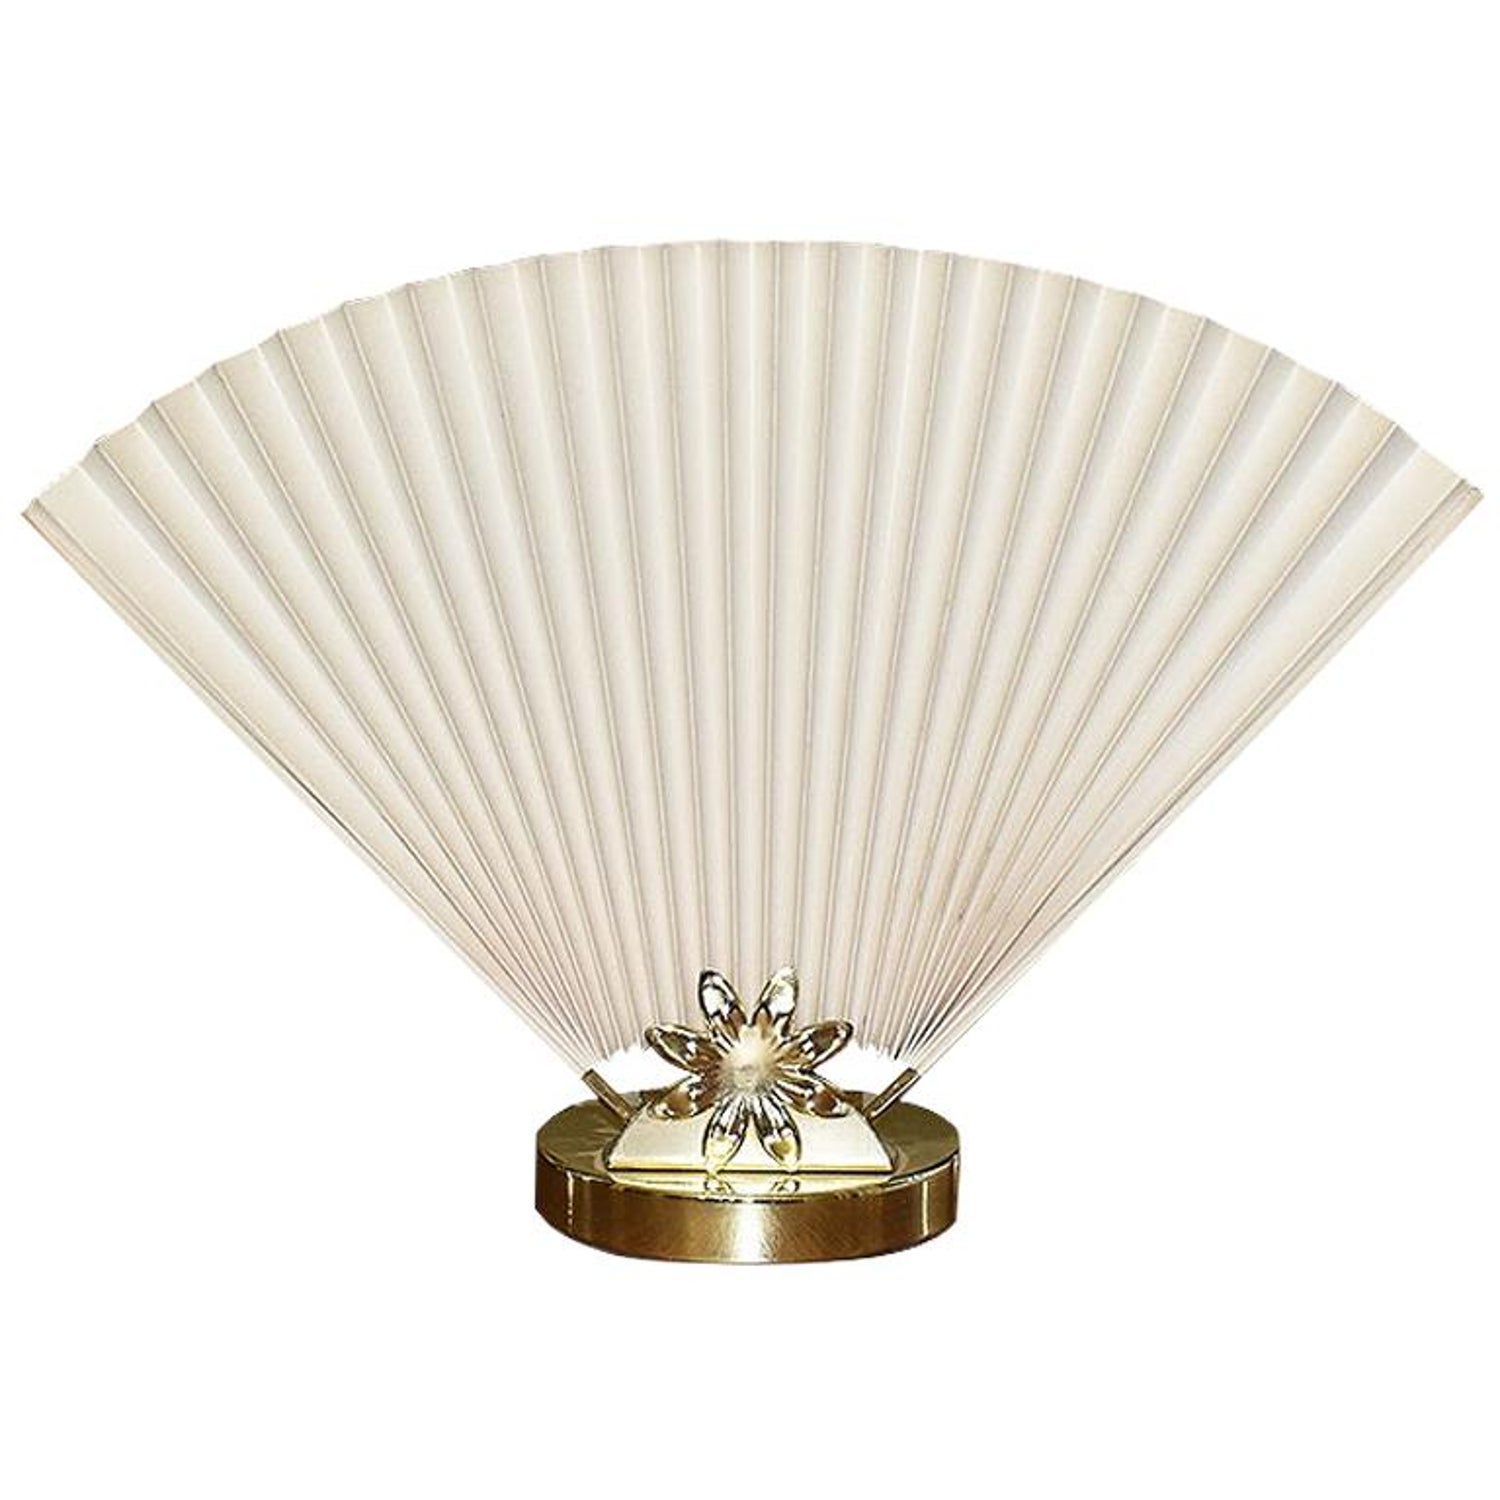 Chinoiserie Accordion Fan Table Lamp, Vintage Fan Table Lamp